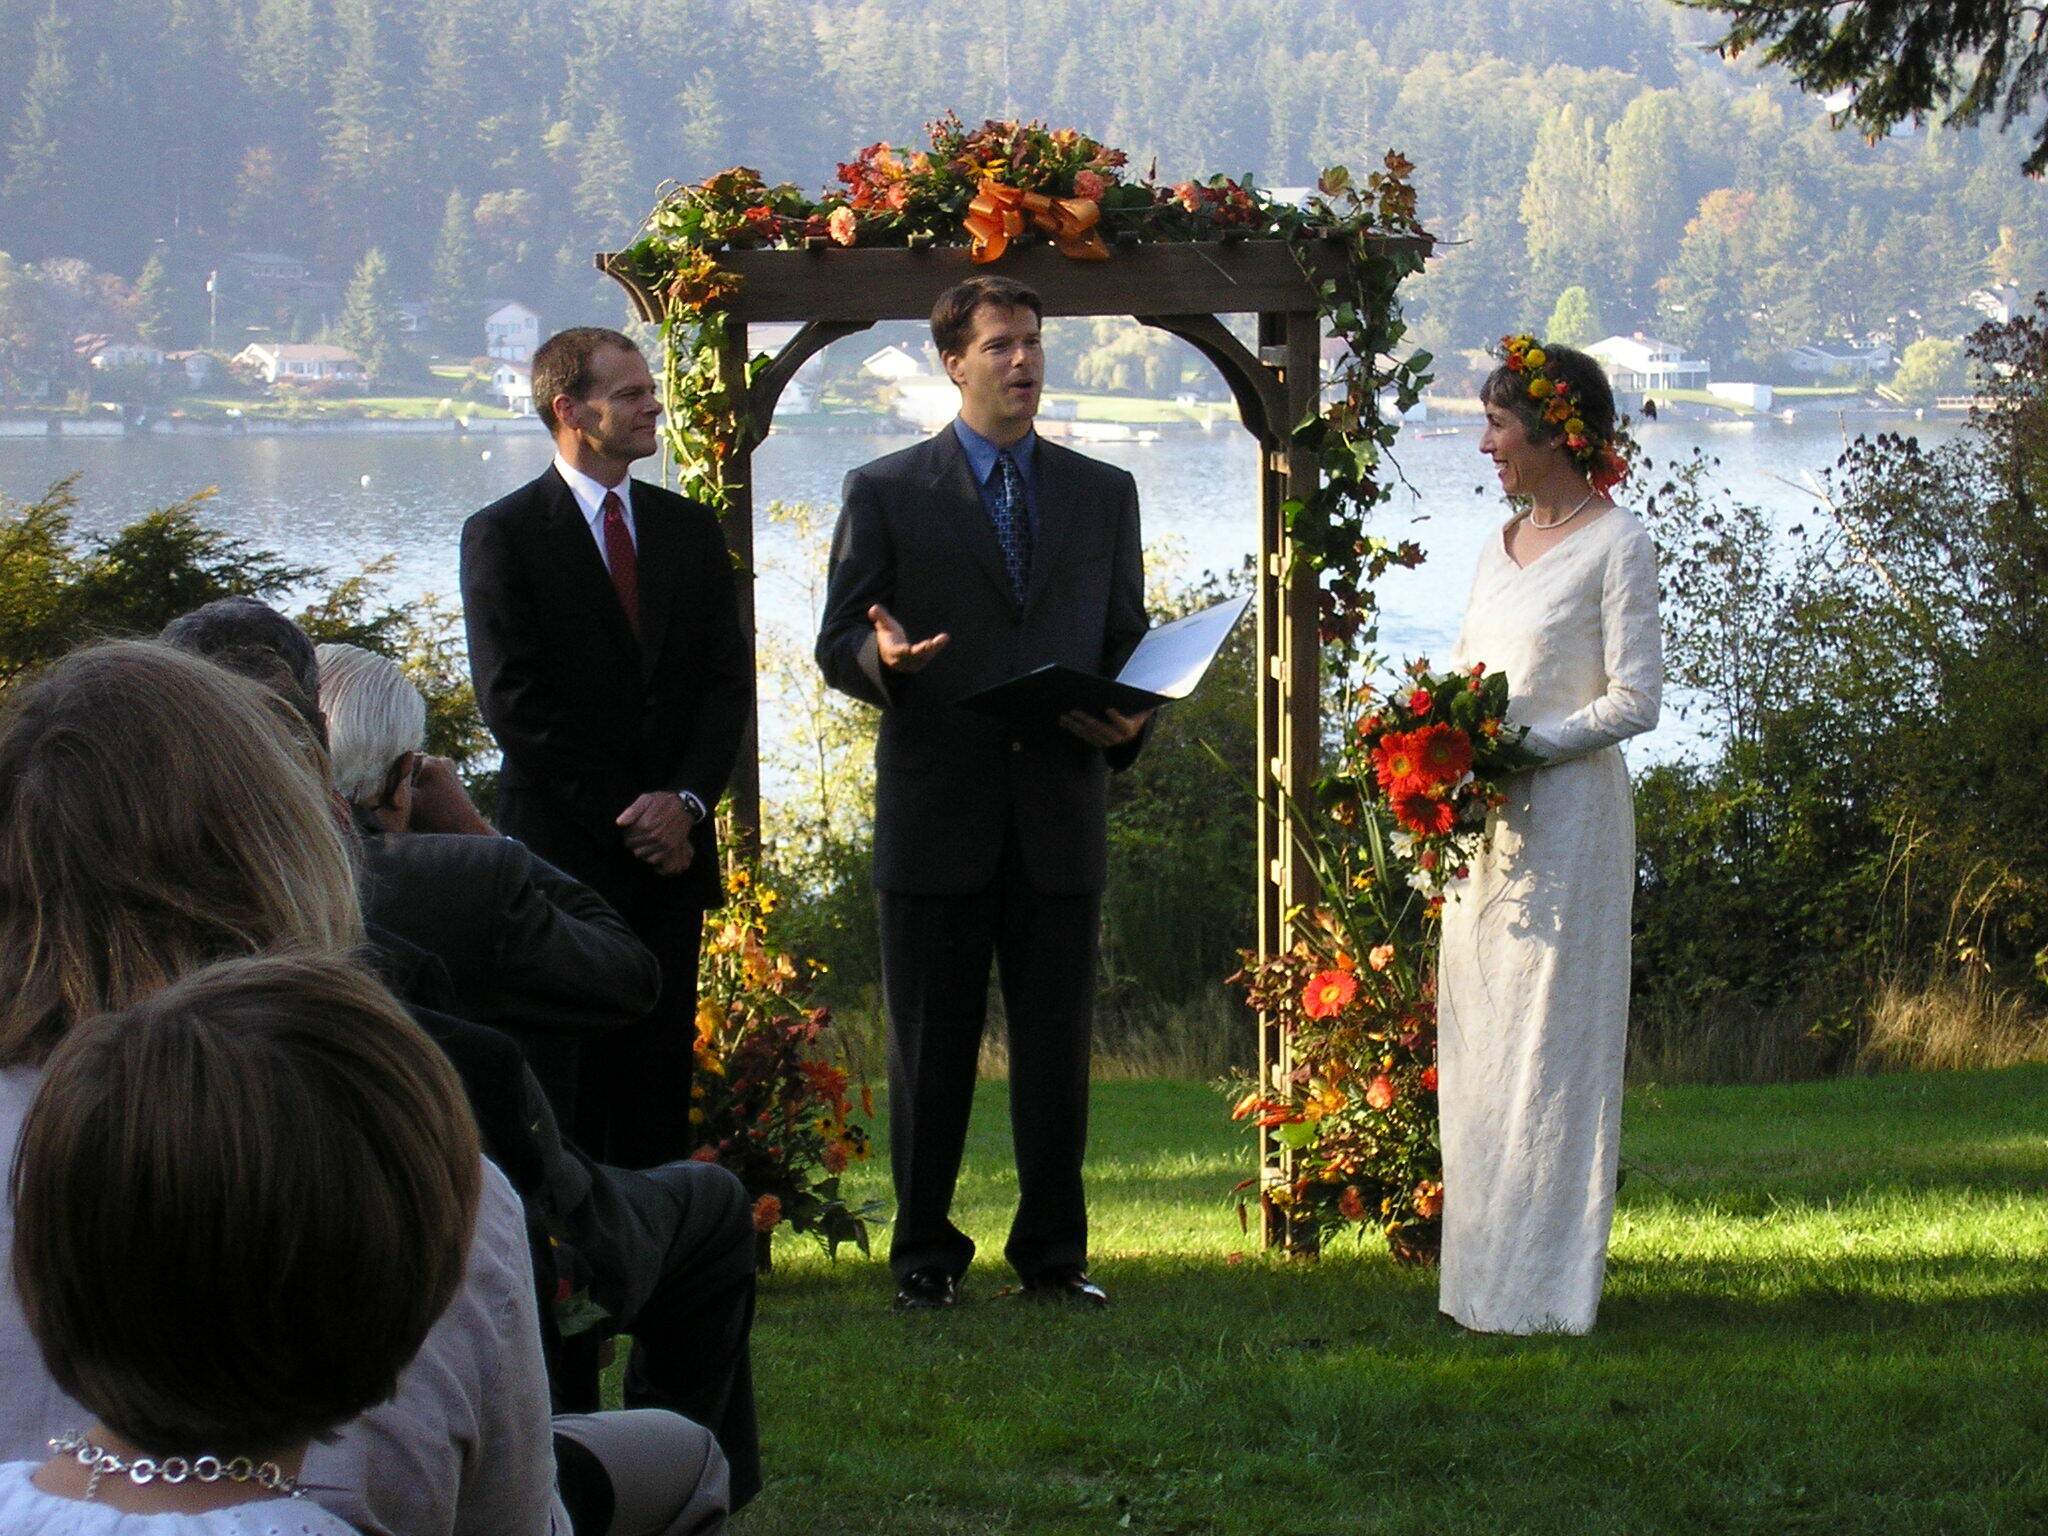 Linda Irvine and Peter Oakley are one of several Whidbey Island couples who have tied the knot at Freeland Hall. Their wedding took place in 2004. (Photo provided)